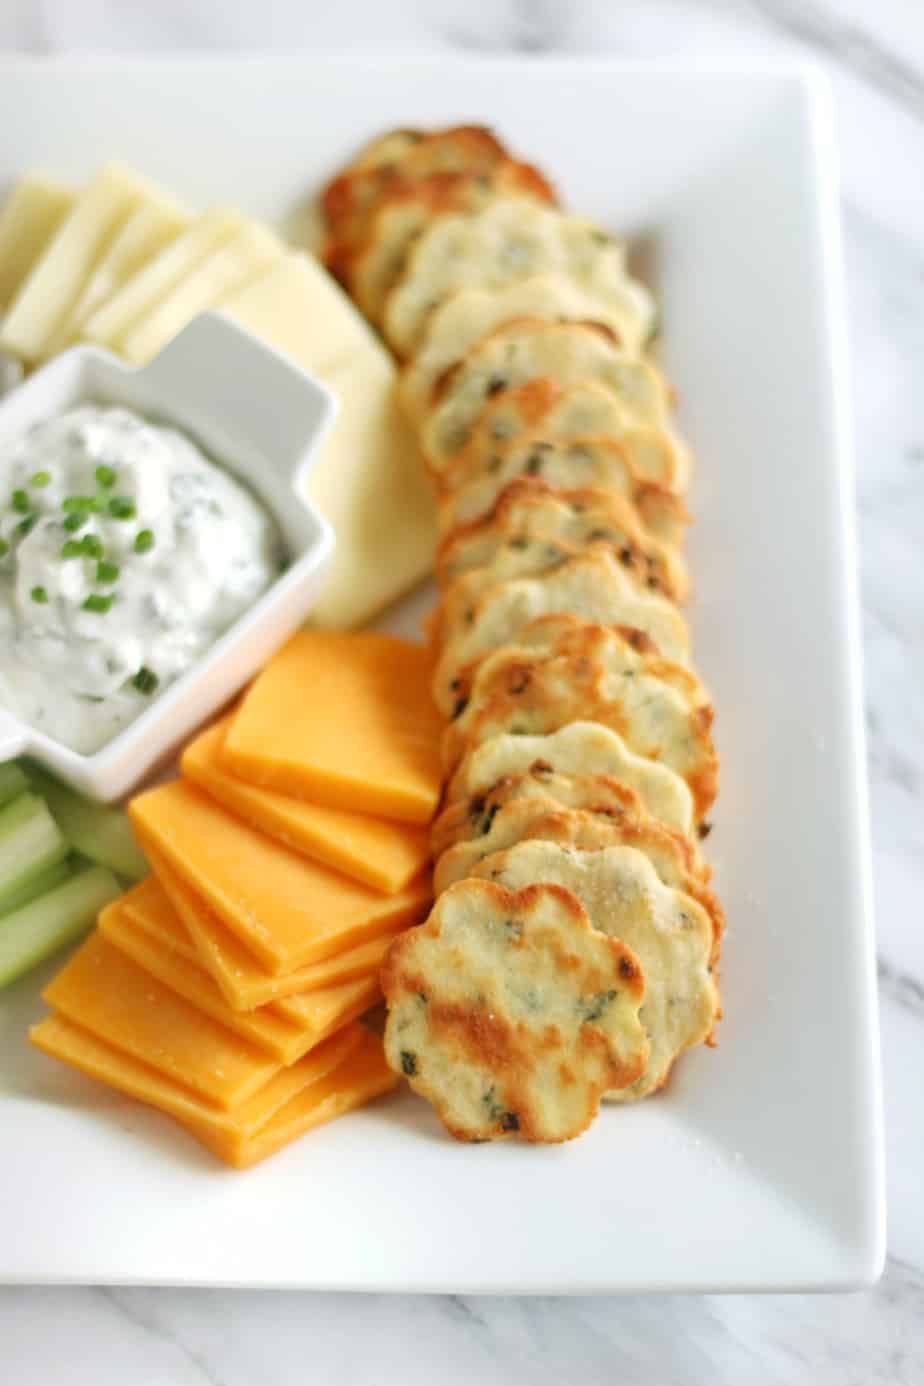 Keto sour cream and chive crackers 2